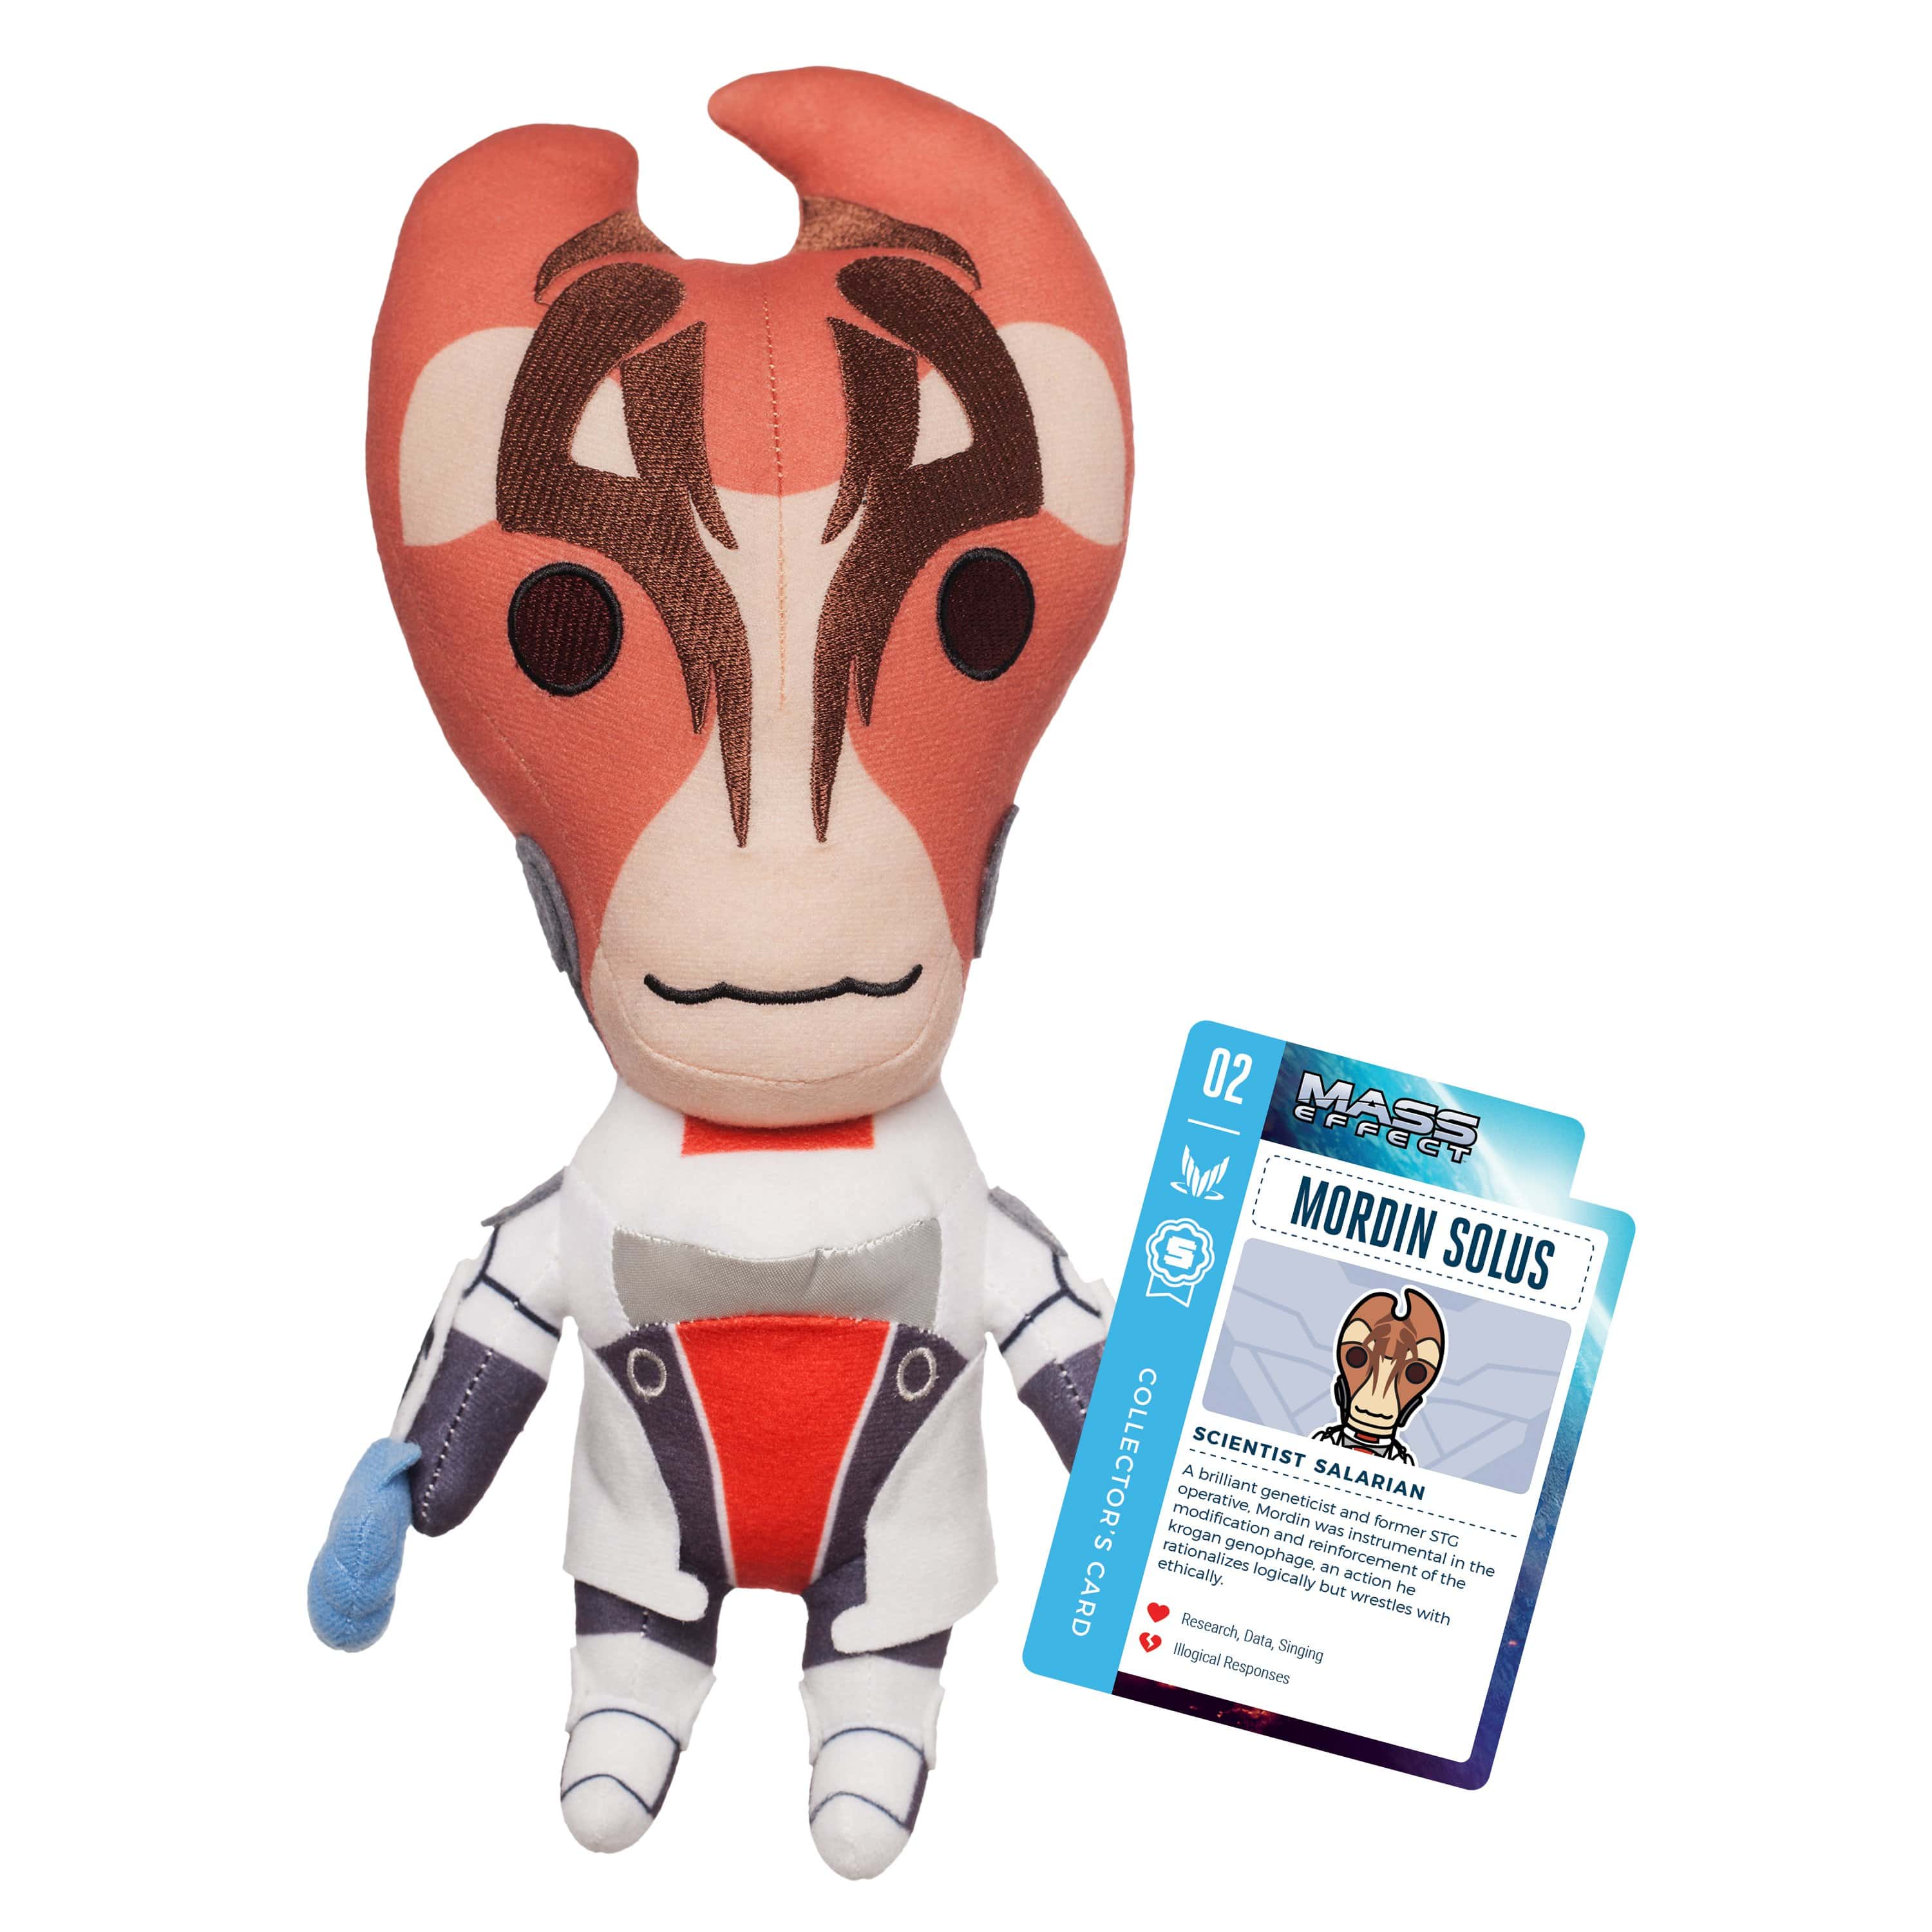 Mass Effect - 12" Mordin Solus Collector's Stuffed Plush With Collector's Card